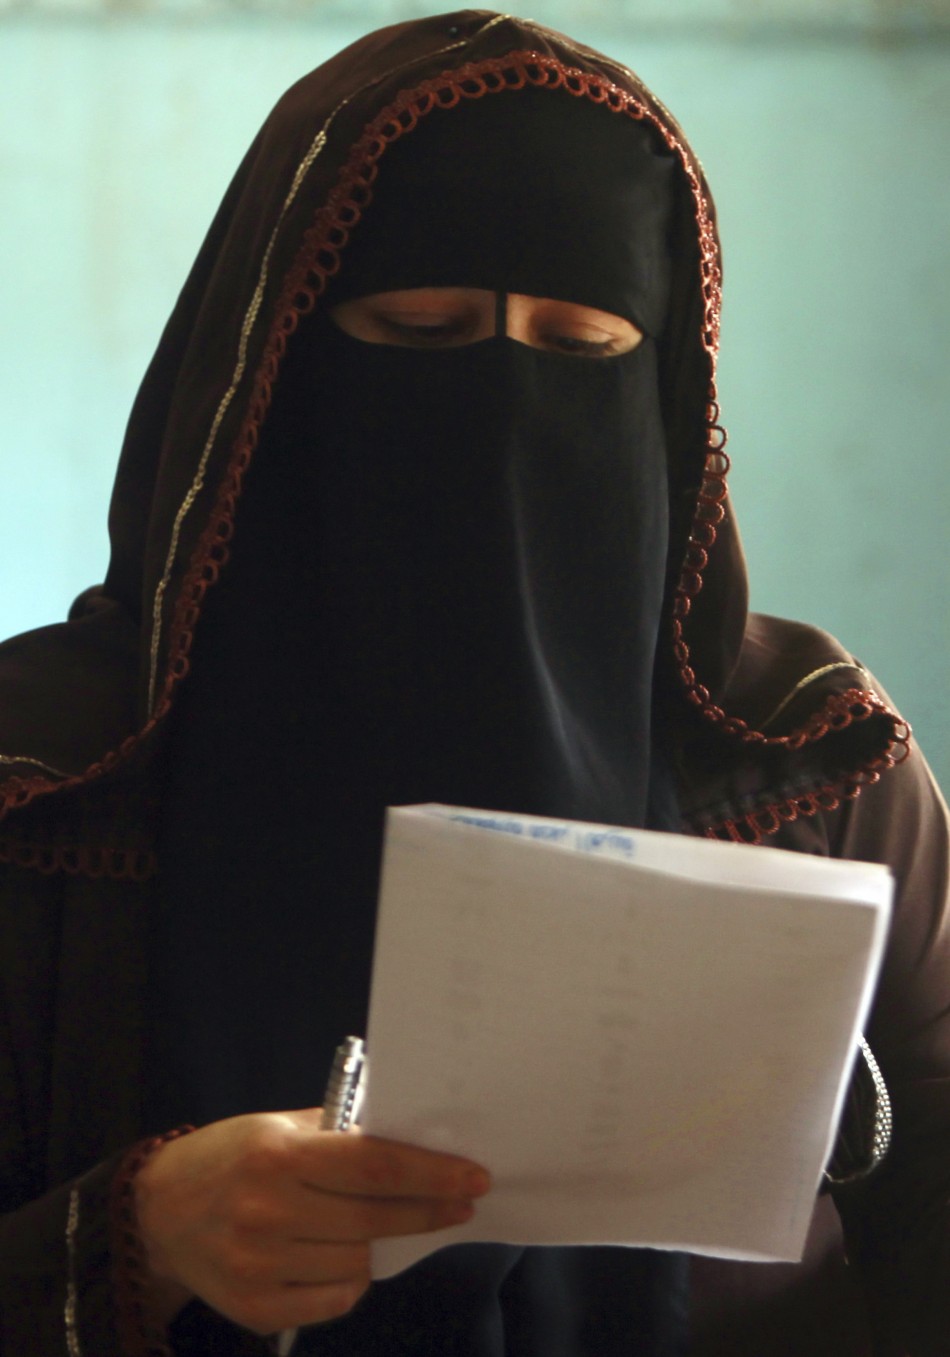 A woman reads her ballot paper before casting her vote at a polling station during the parliamentary election in Cairo